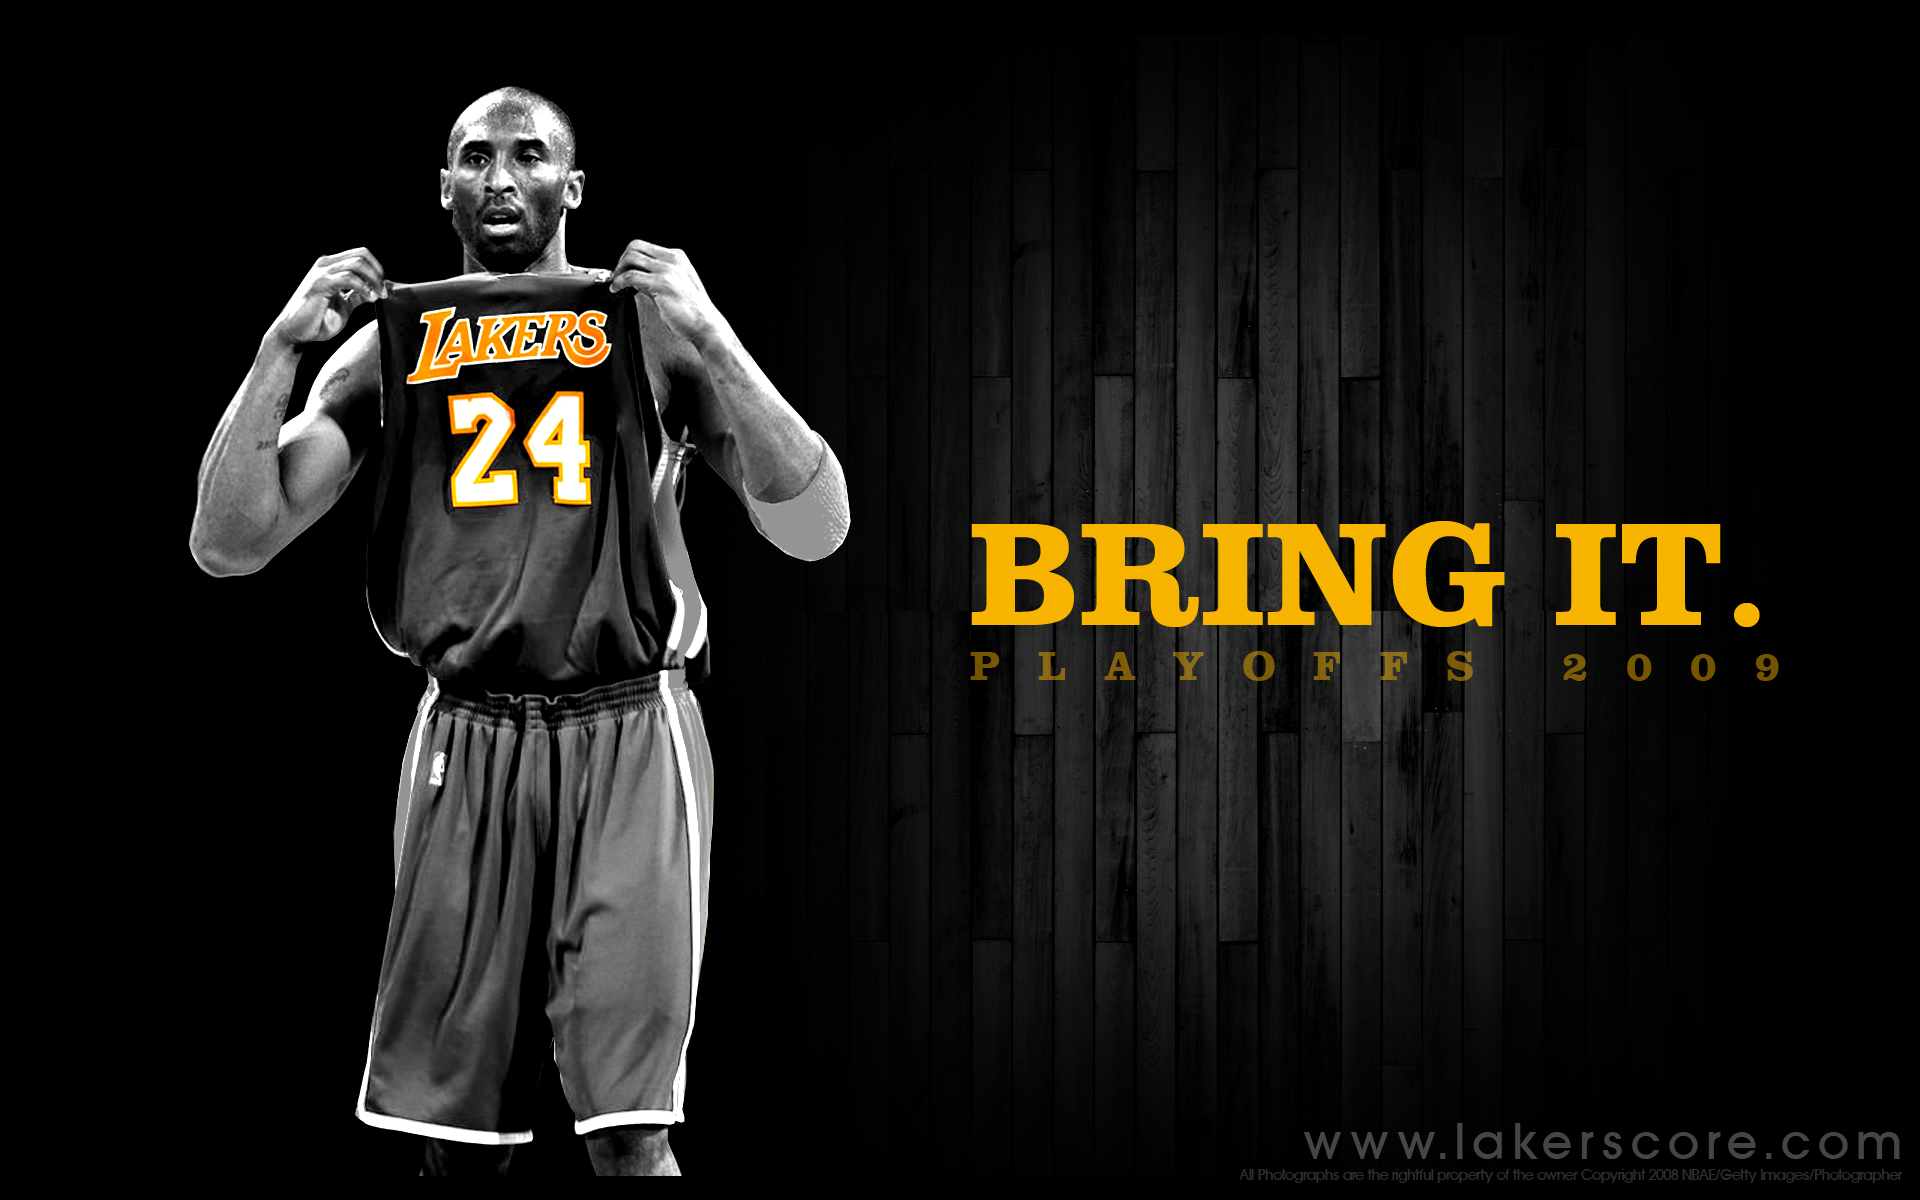 Playoff, lakers, focus, discount, wallpapers, playoffs (#23342)